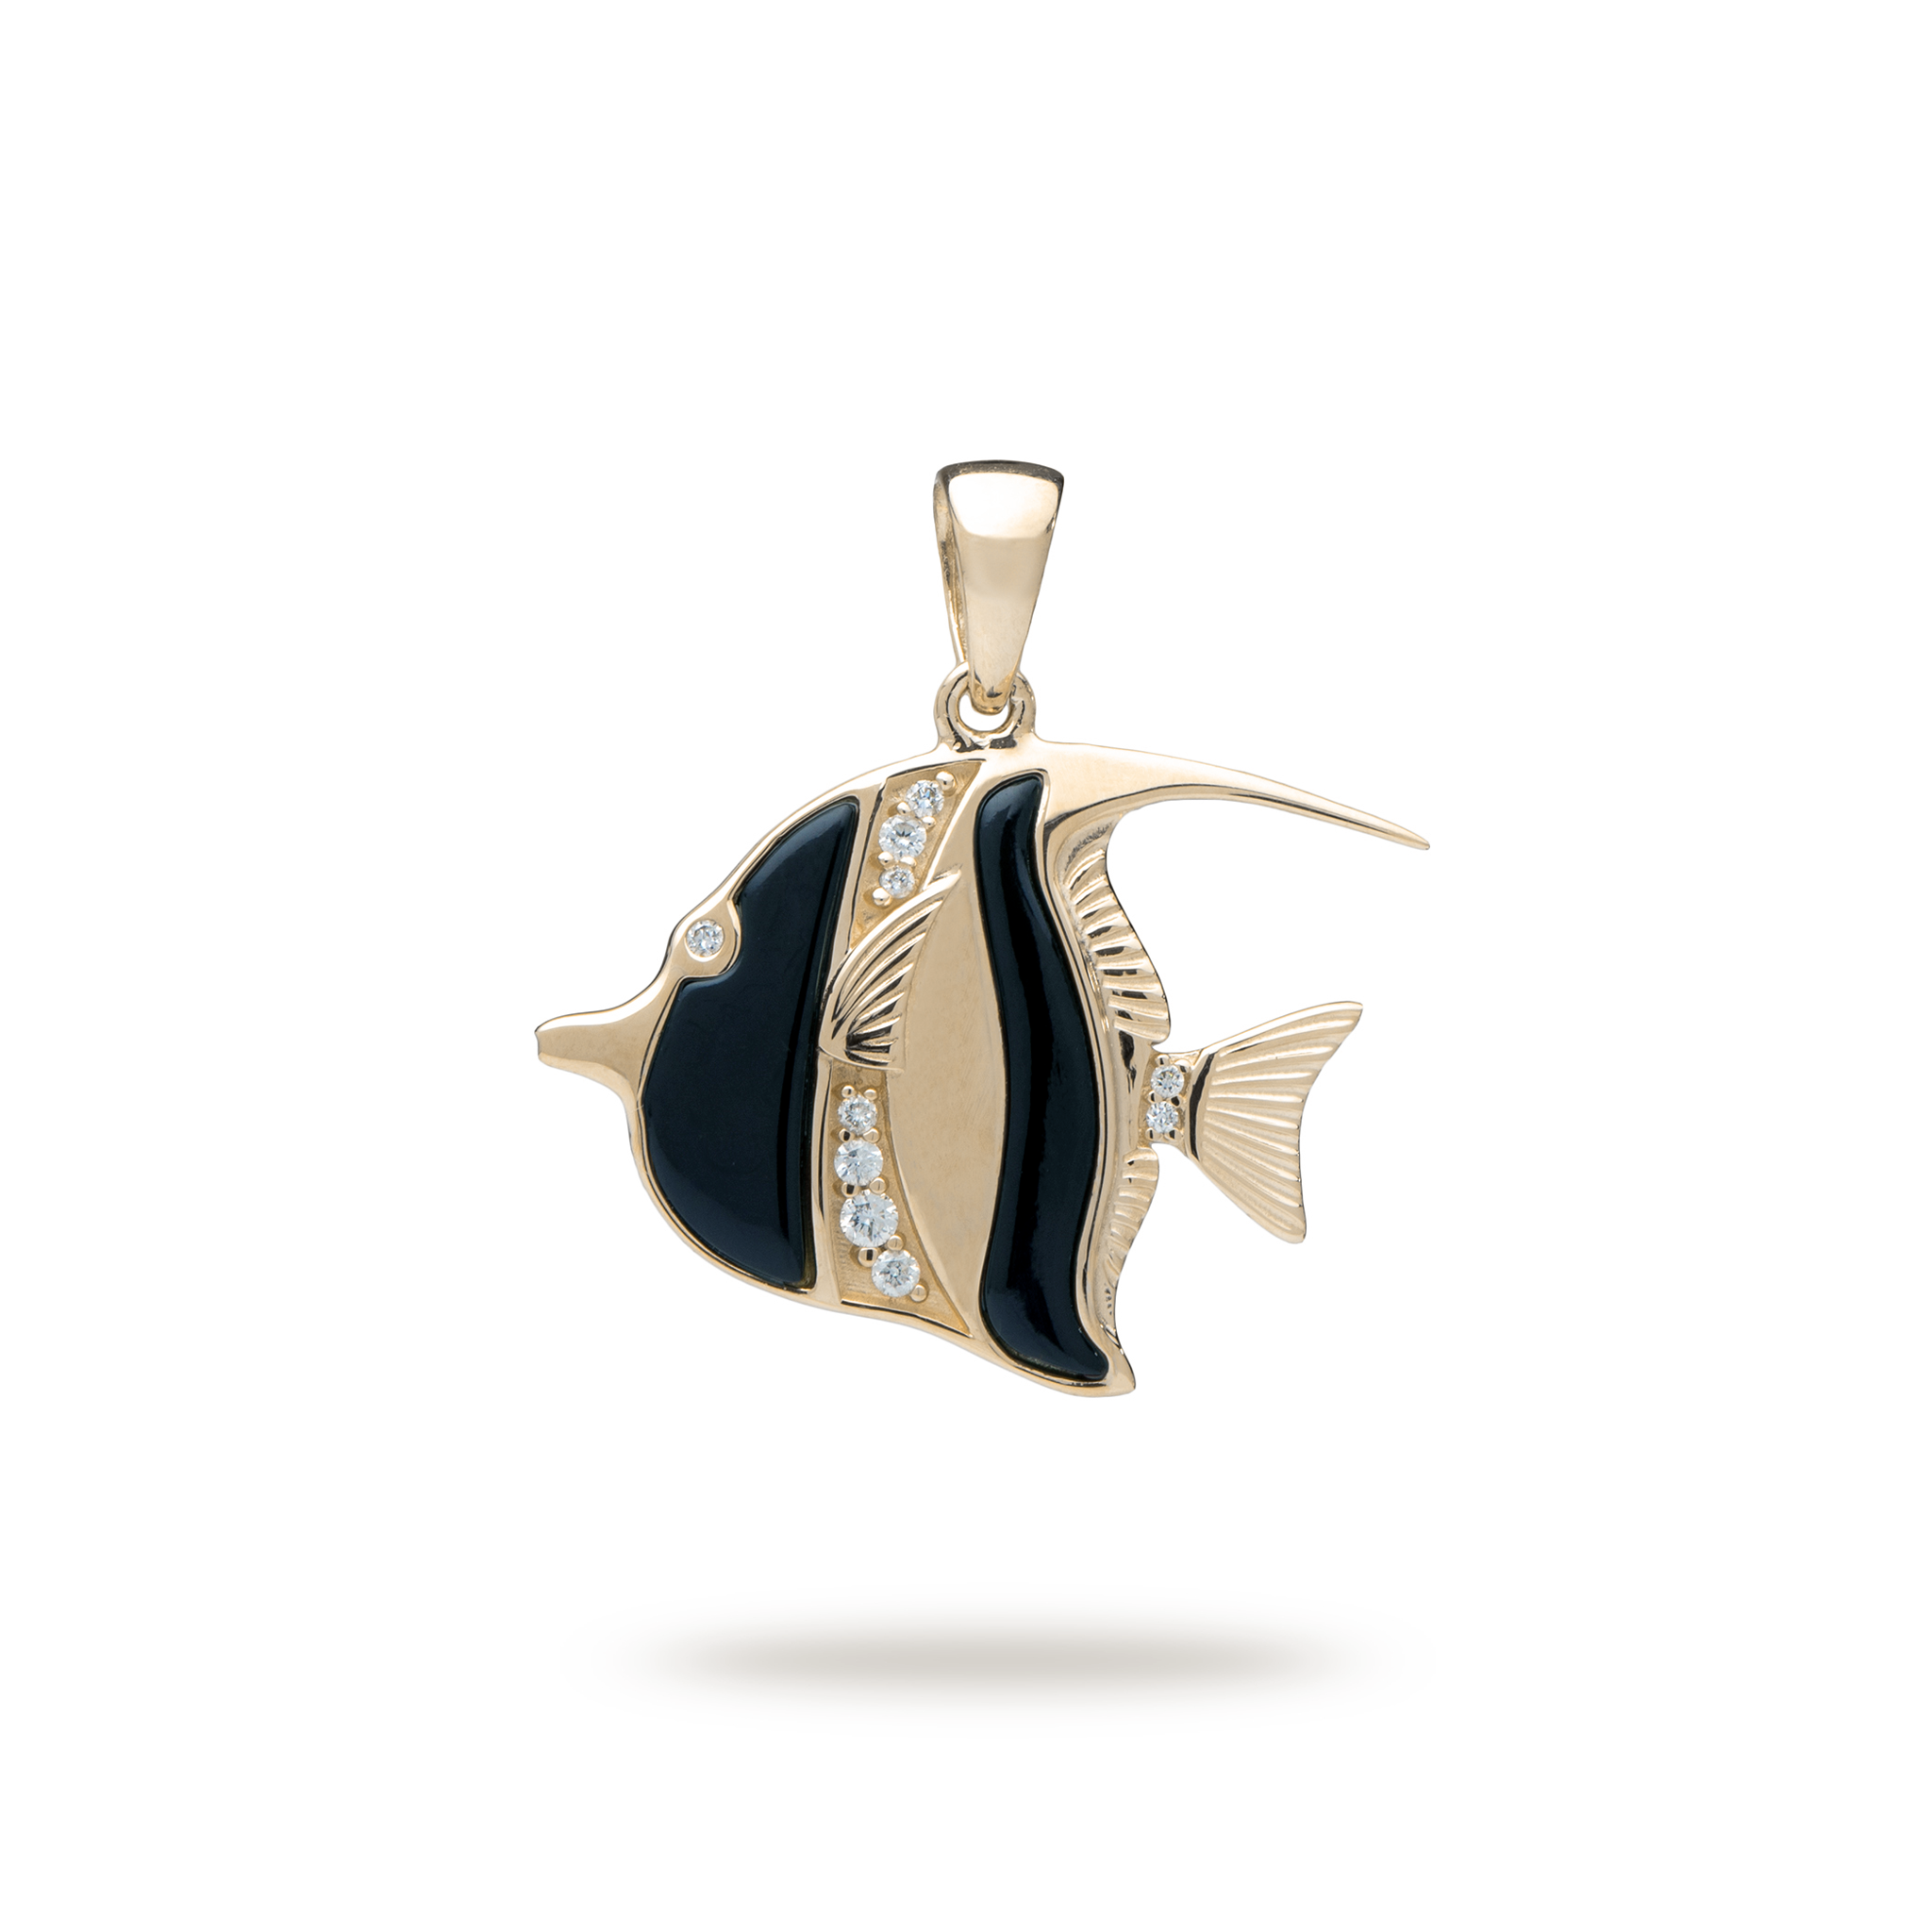 Sealife Angelfish Black Coral Pendant in Gold with Diamonds - 23mm